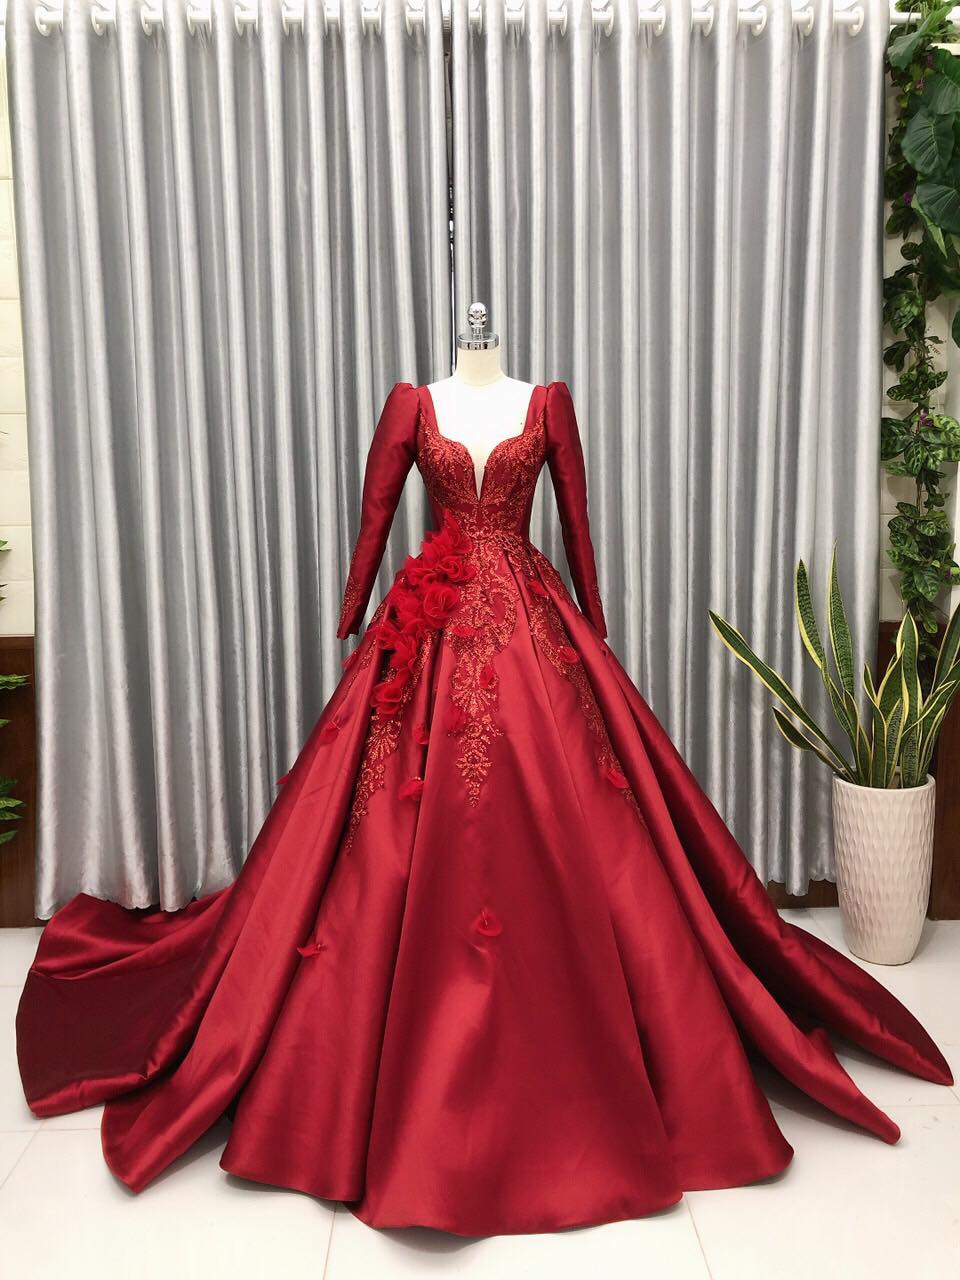 Extravagant red satin ball gown wedding/prom dress with ...